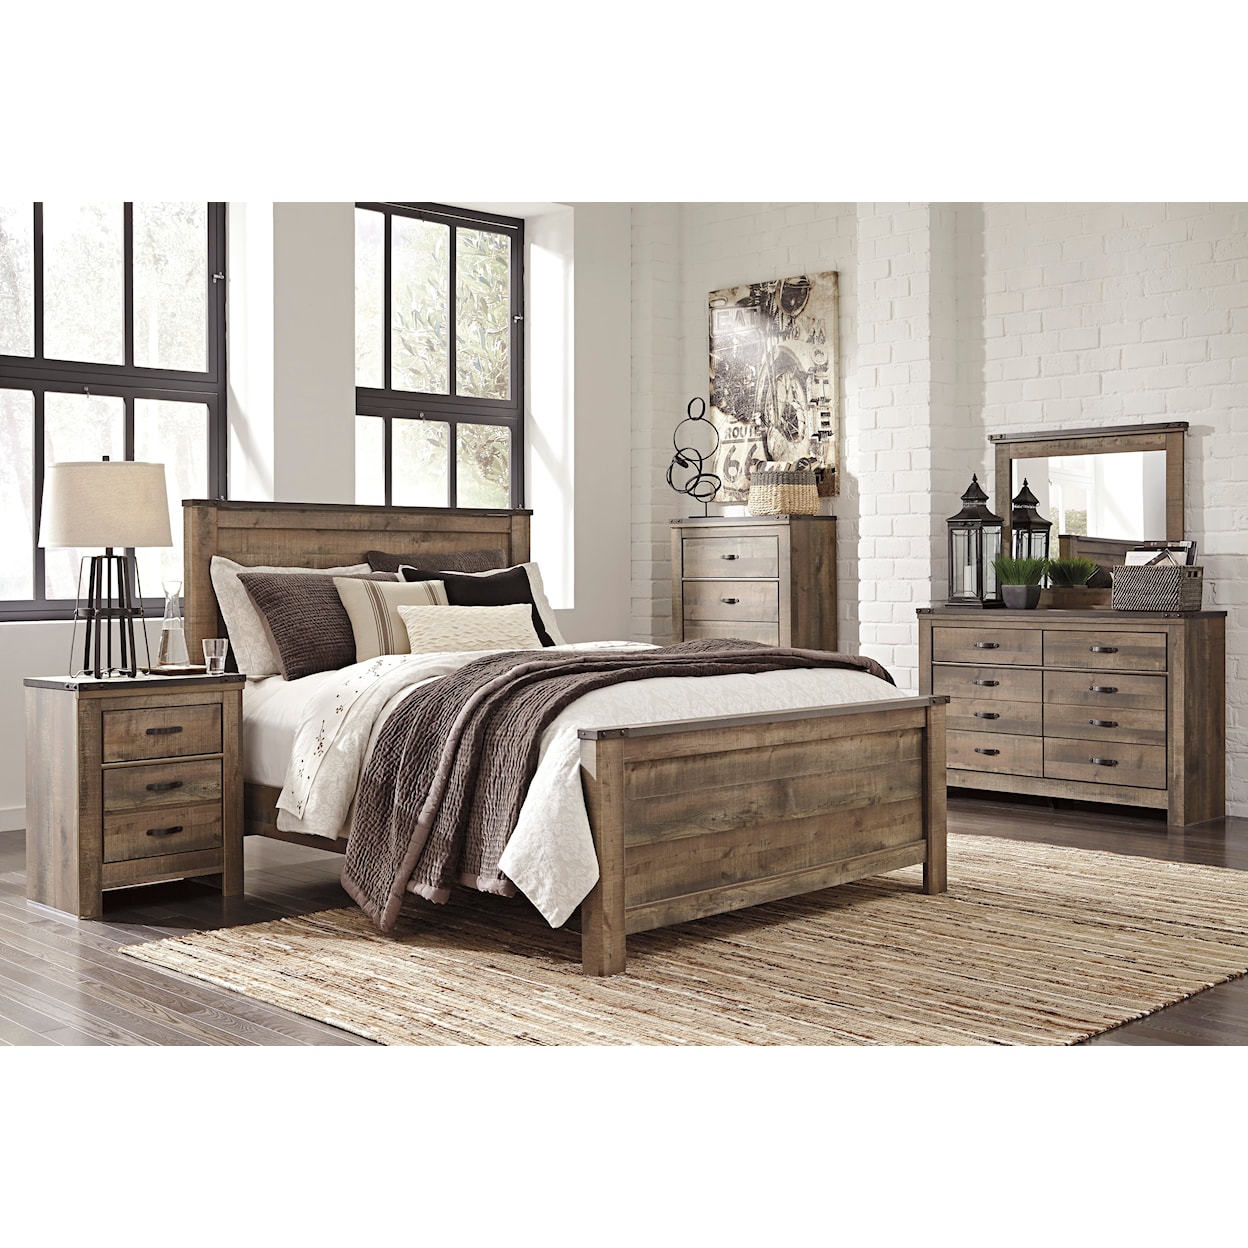 Signature Design by Ashley Vickers 4-Piece Bedroom Group